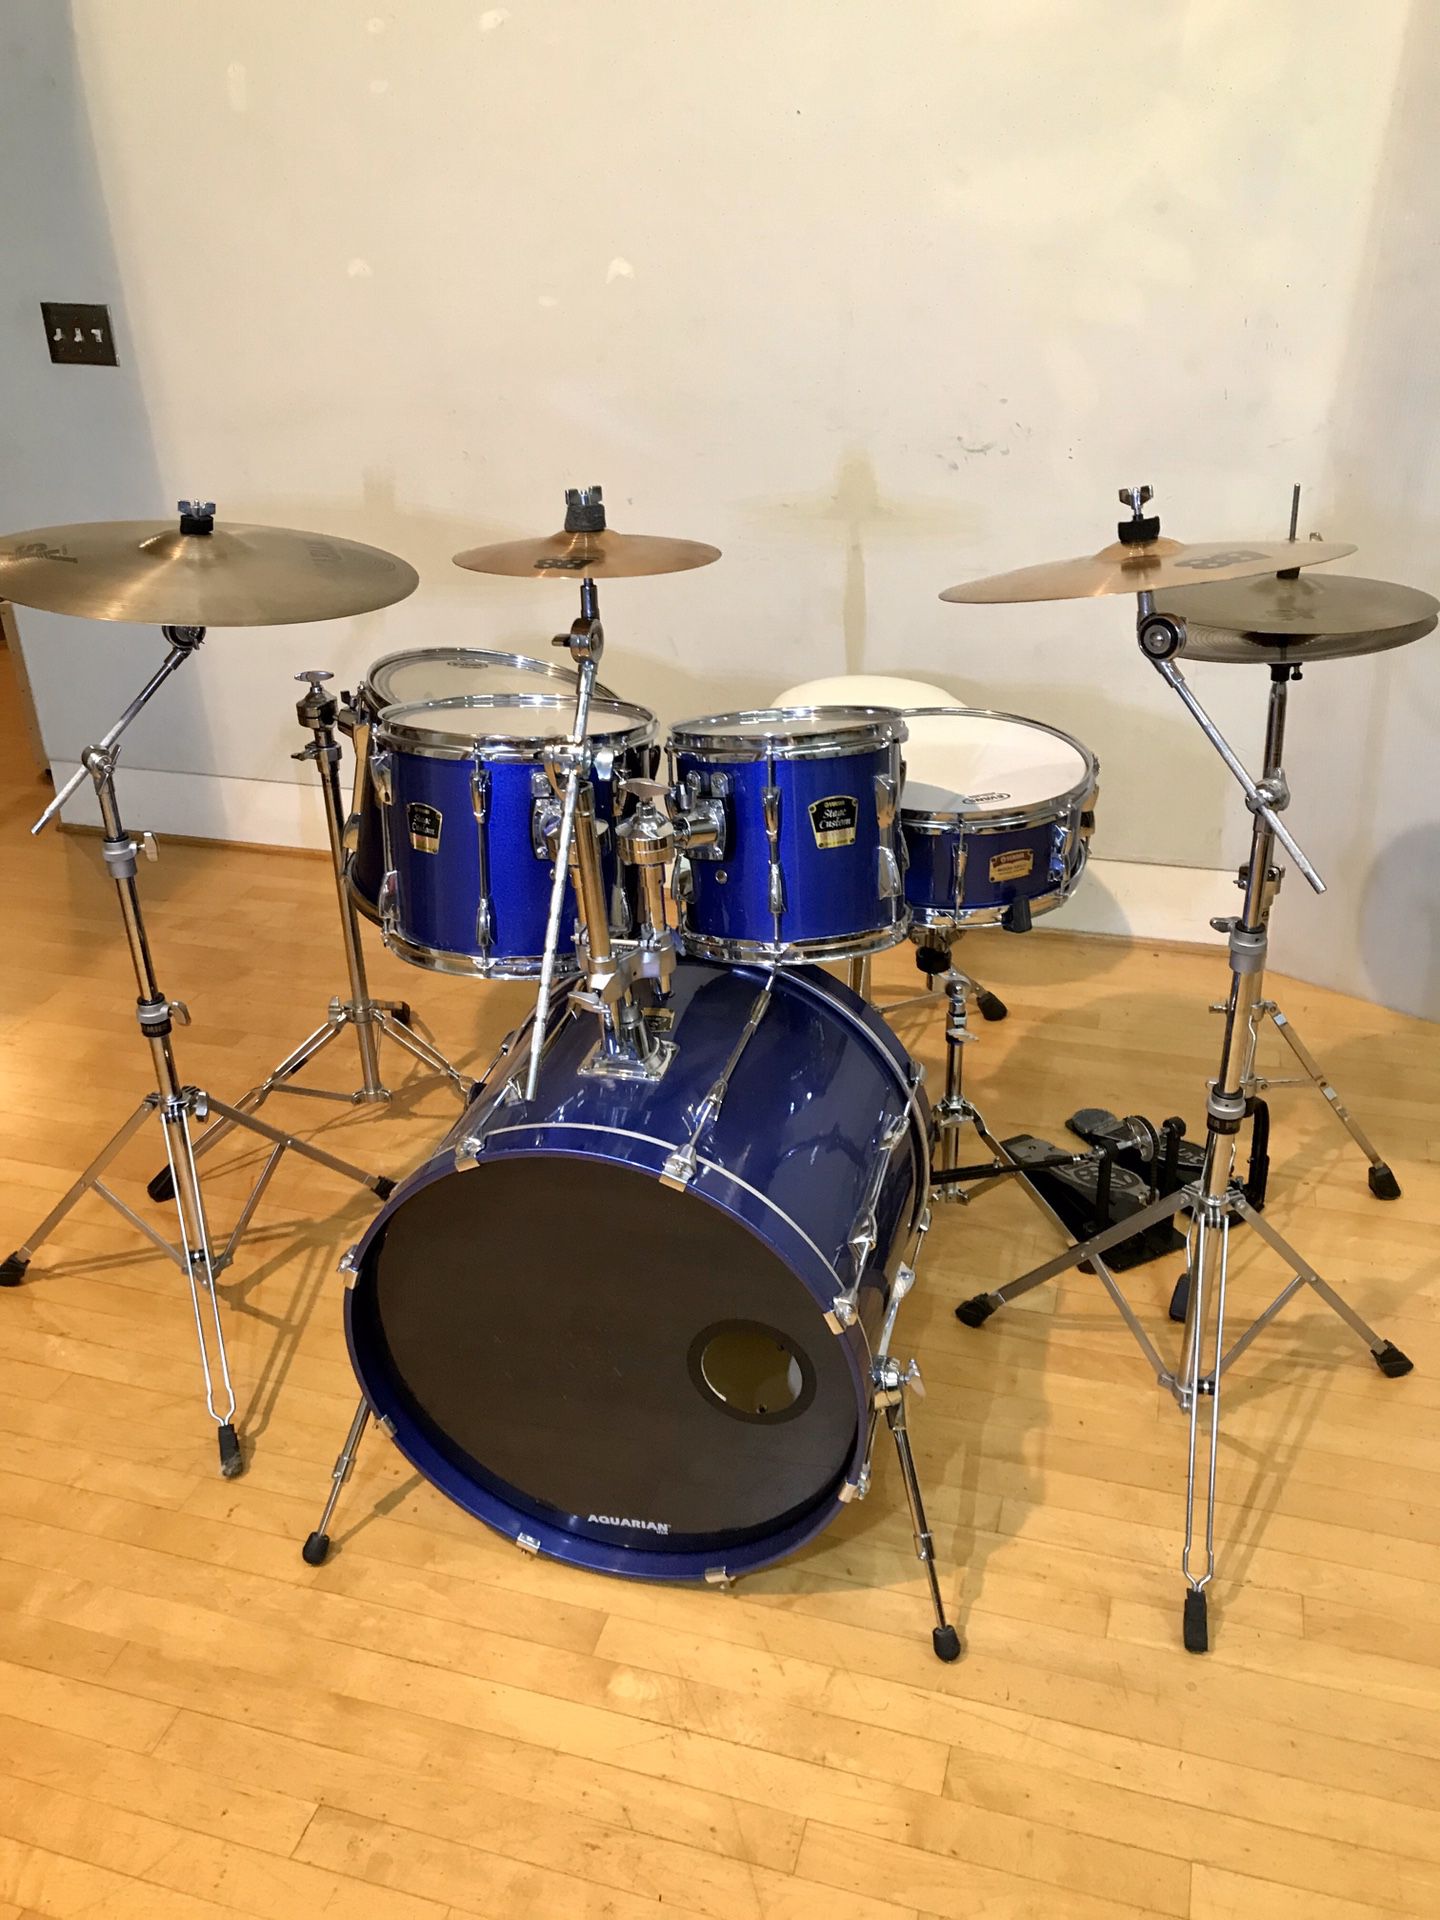 Yamaha Stage Custom Advantage 5 piece blue drum set drums kit Sabian AA XS20 cymbals pearl double bass pedal DW5000 HH $750 Ontario